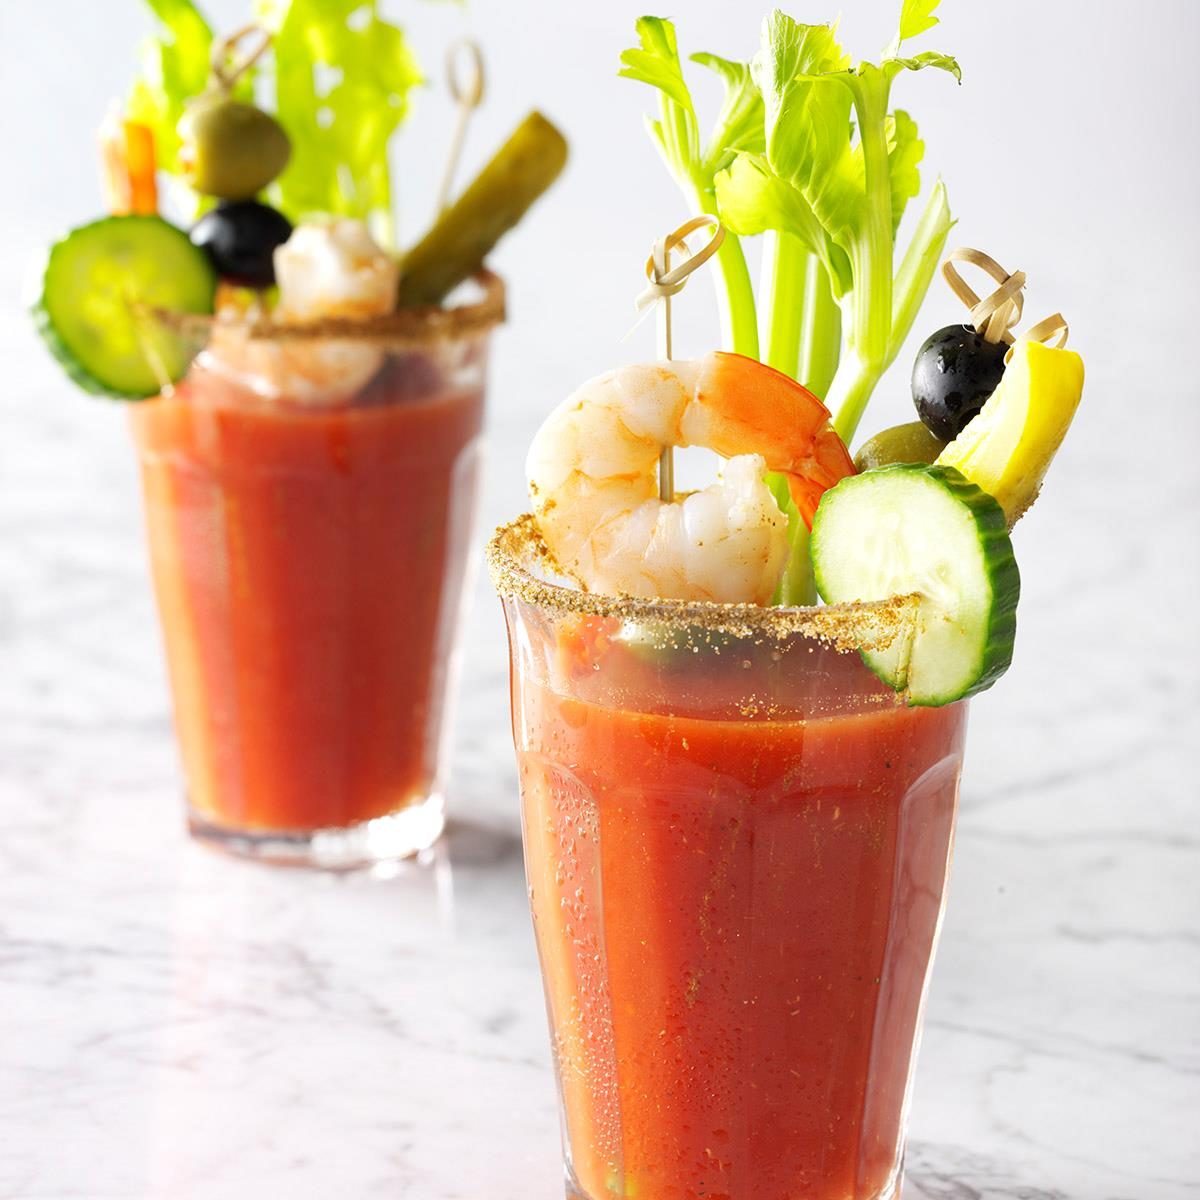 Bloody Mary Recipe: How to Make It